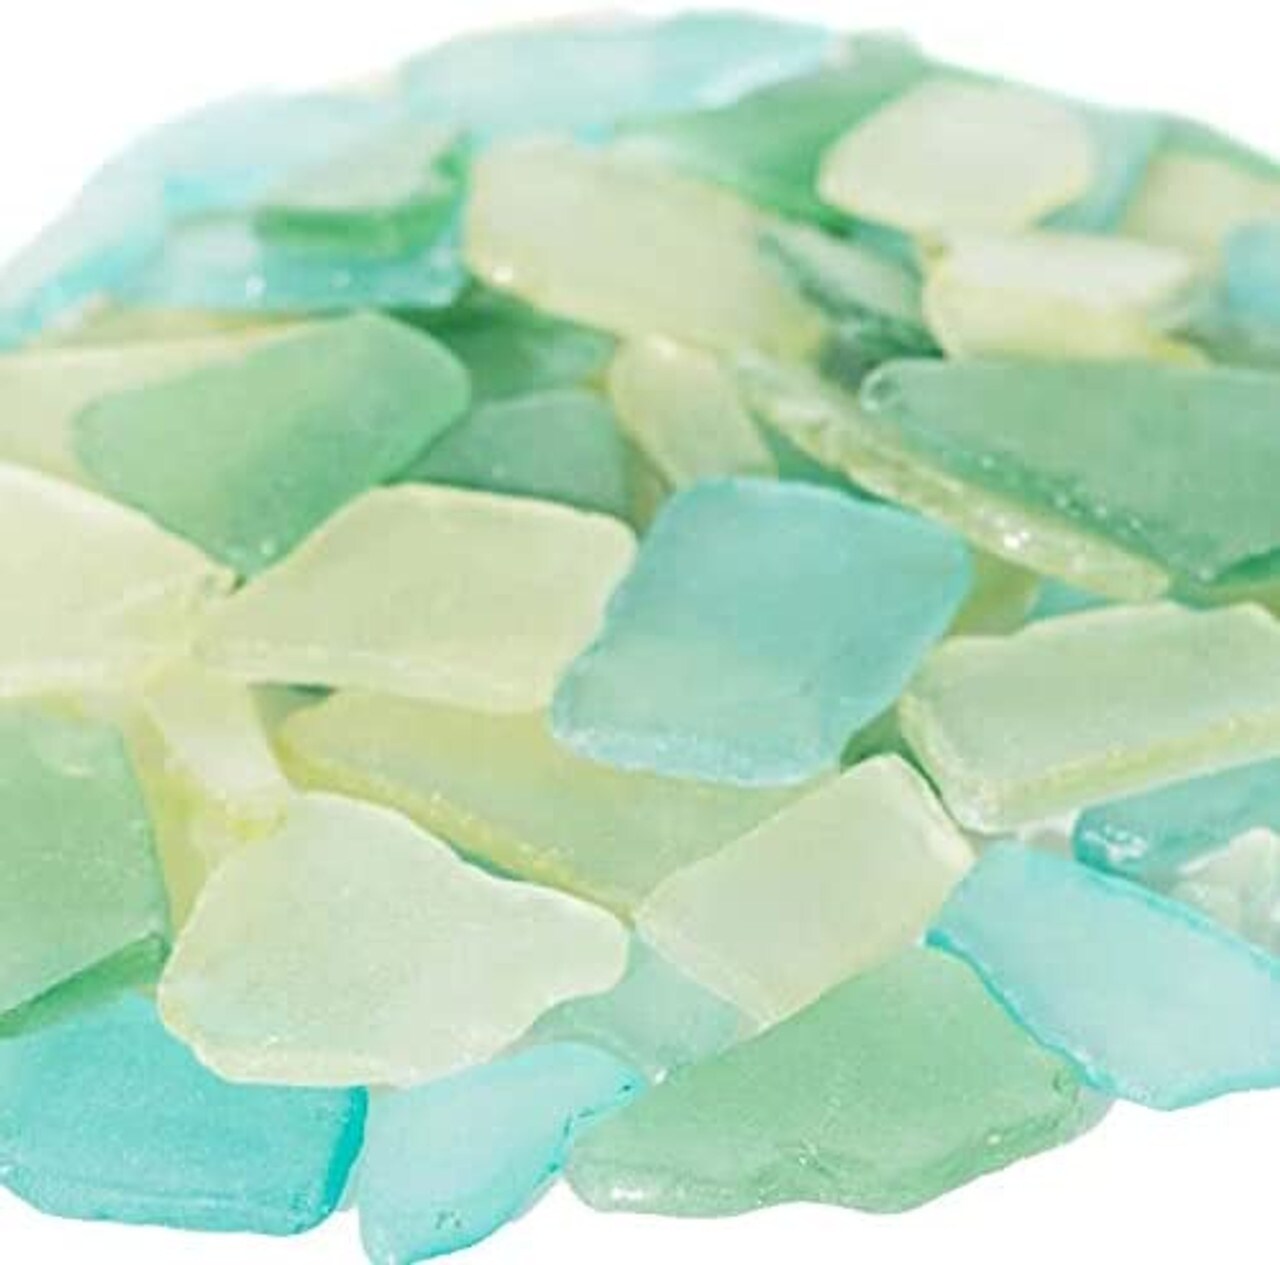 1 LB LIGHT GREEN BEACH SEAGLASS SEA GLASS For Crafts or Jewelry